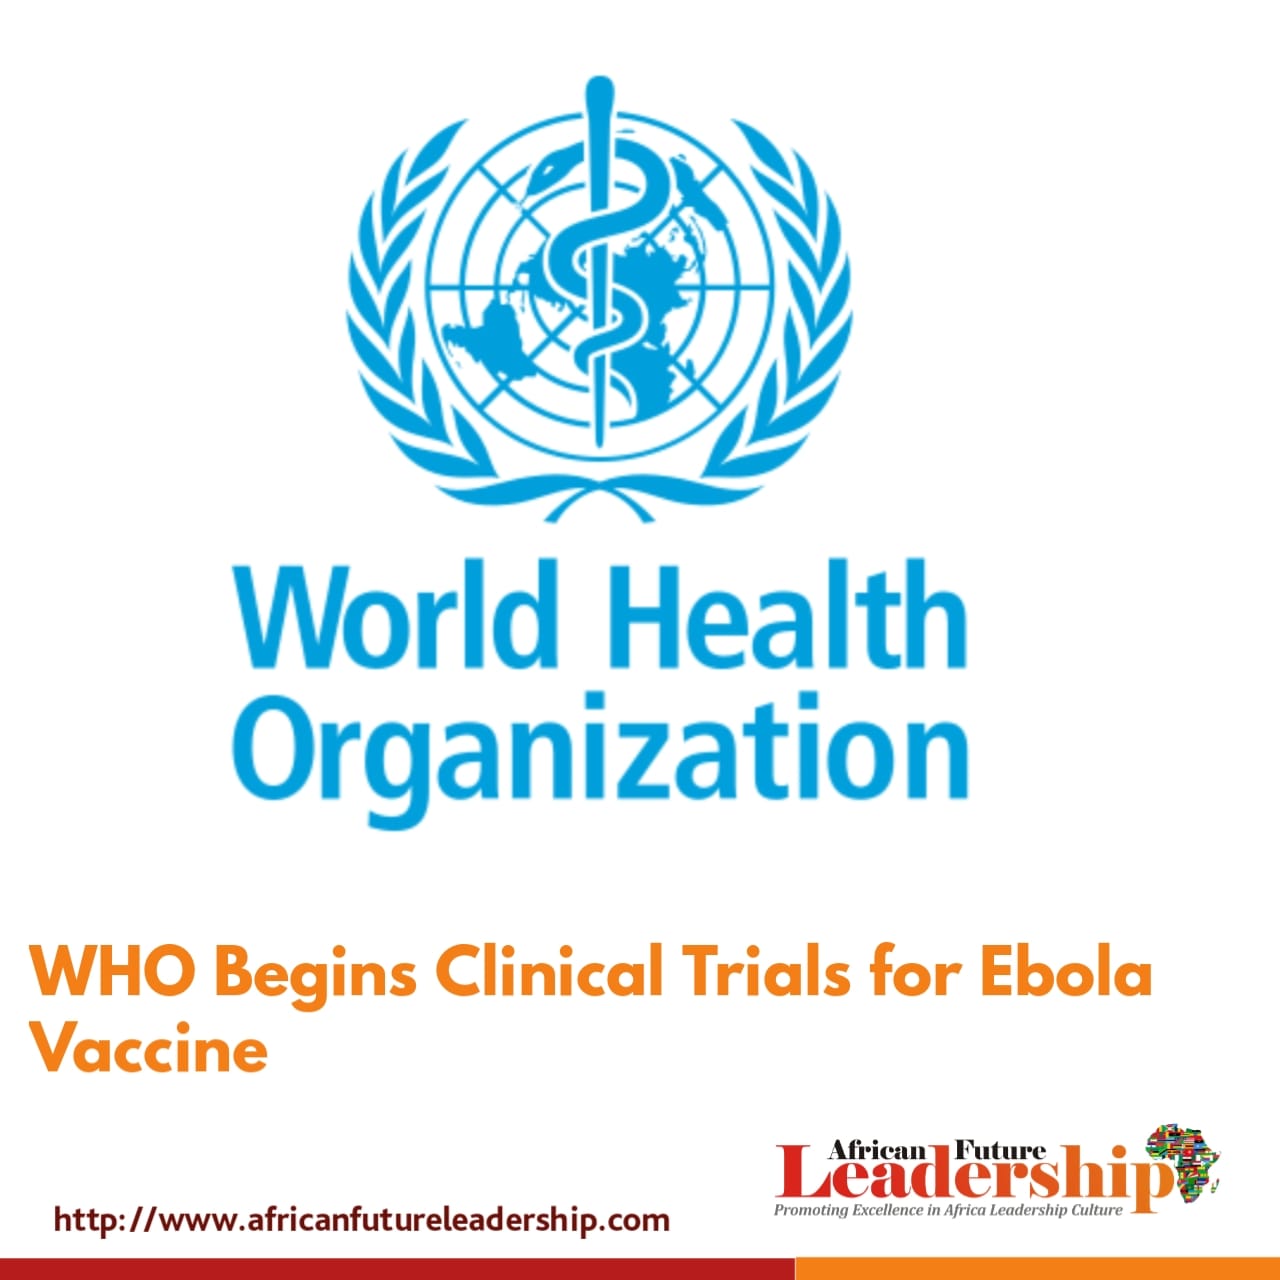 WHO Begins Clinical Trials for Ebola Vaccine